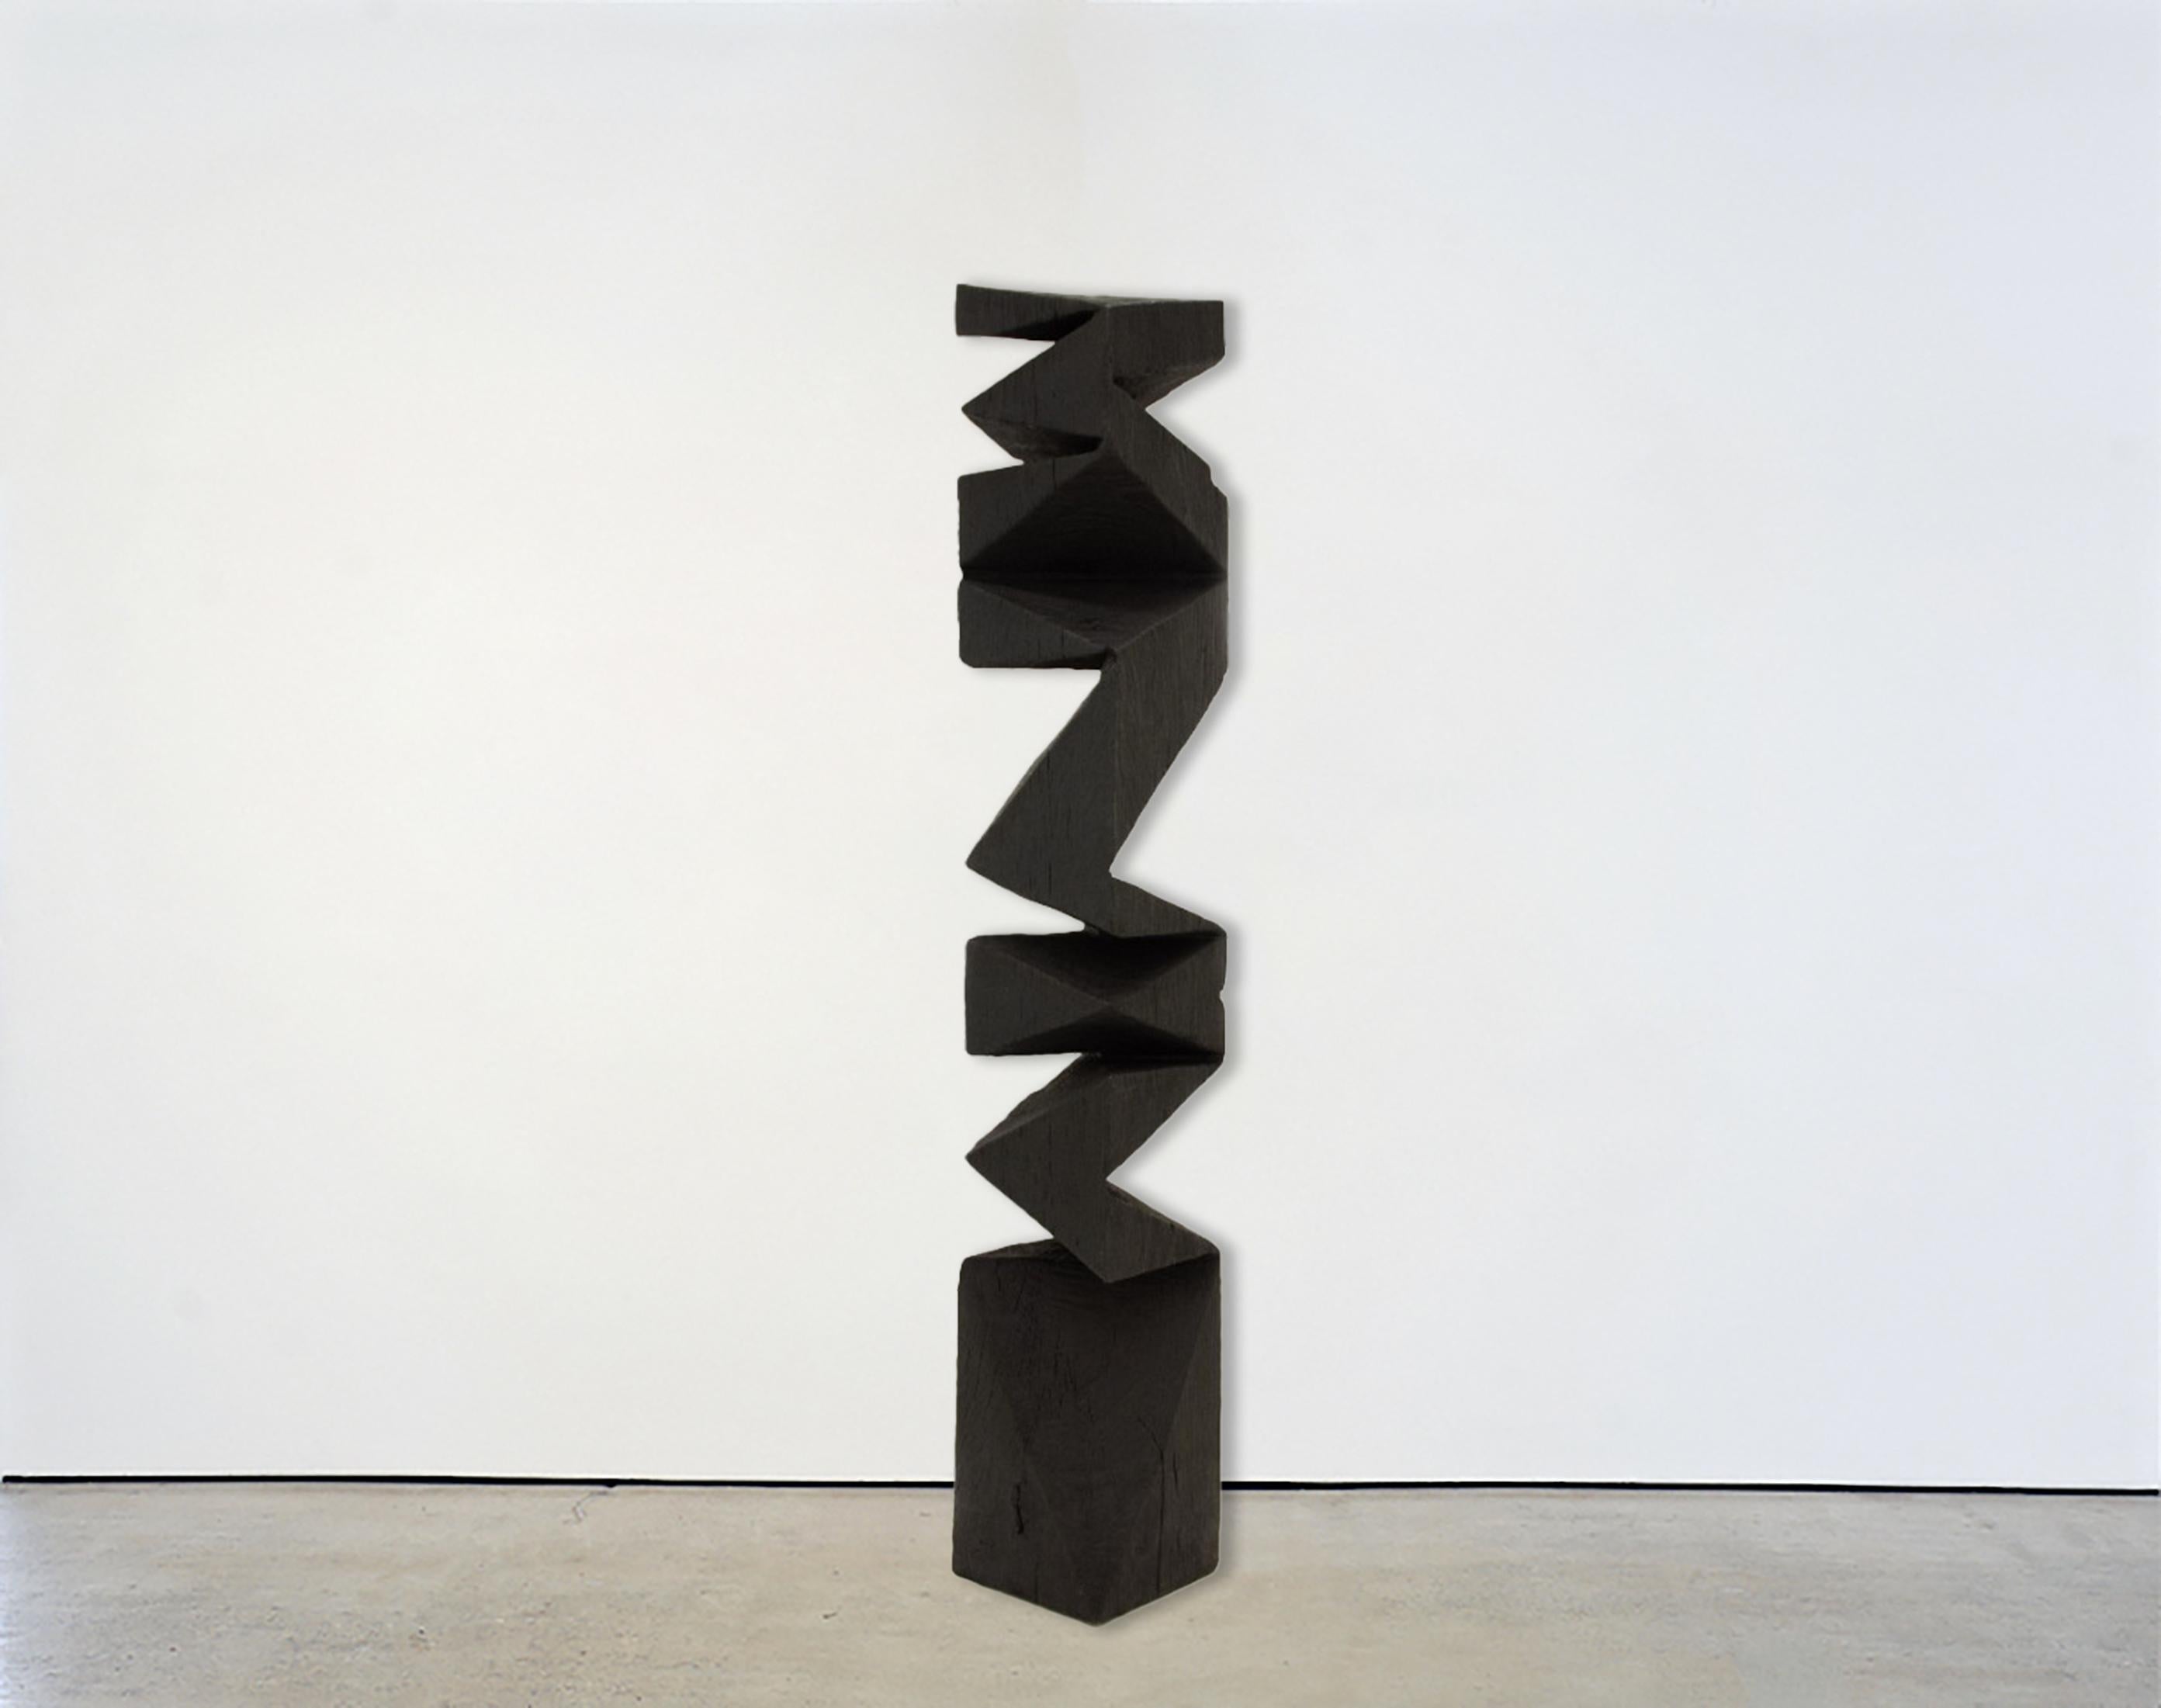 Aldo Chaparro is a Mexican/Peruvian artist whose work focuses on the use of sculpture and oainting to explore form in post-industrial ways. He currently lives and works between Mexico City, Los Angeles, Madrid, and Lima. Chaparro explores form